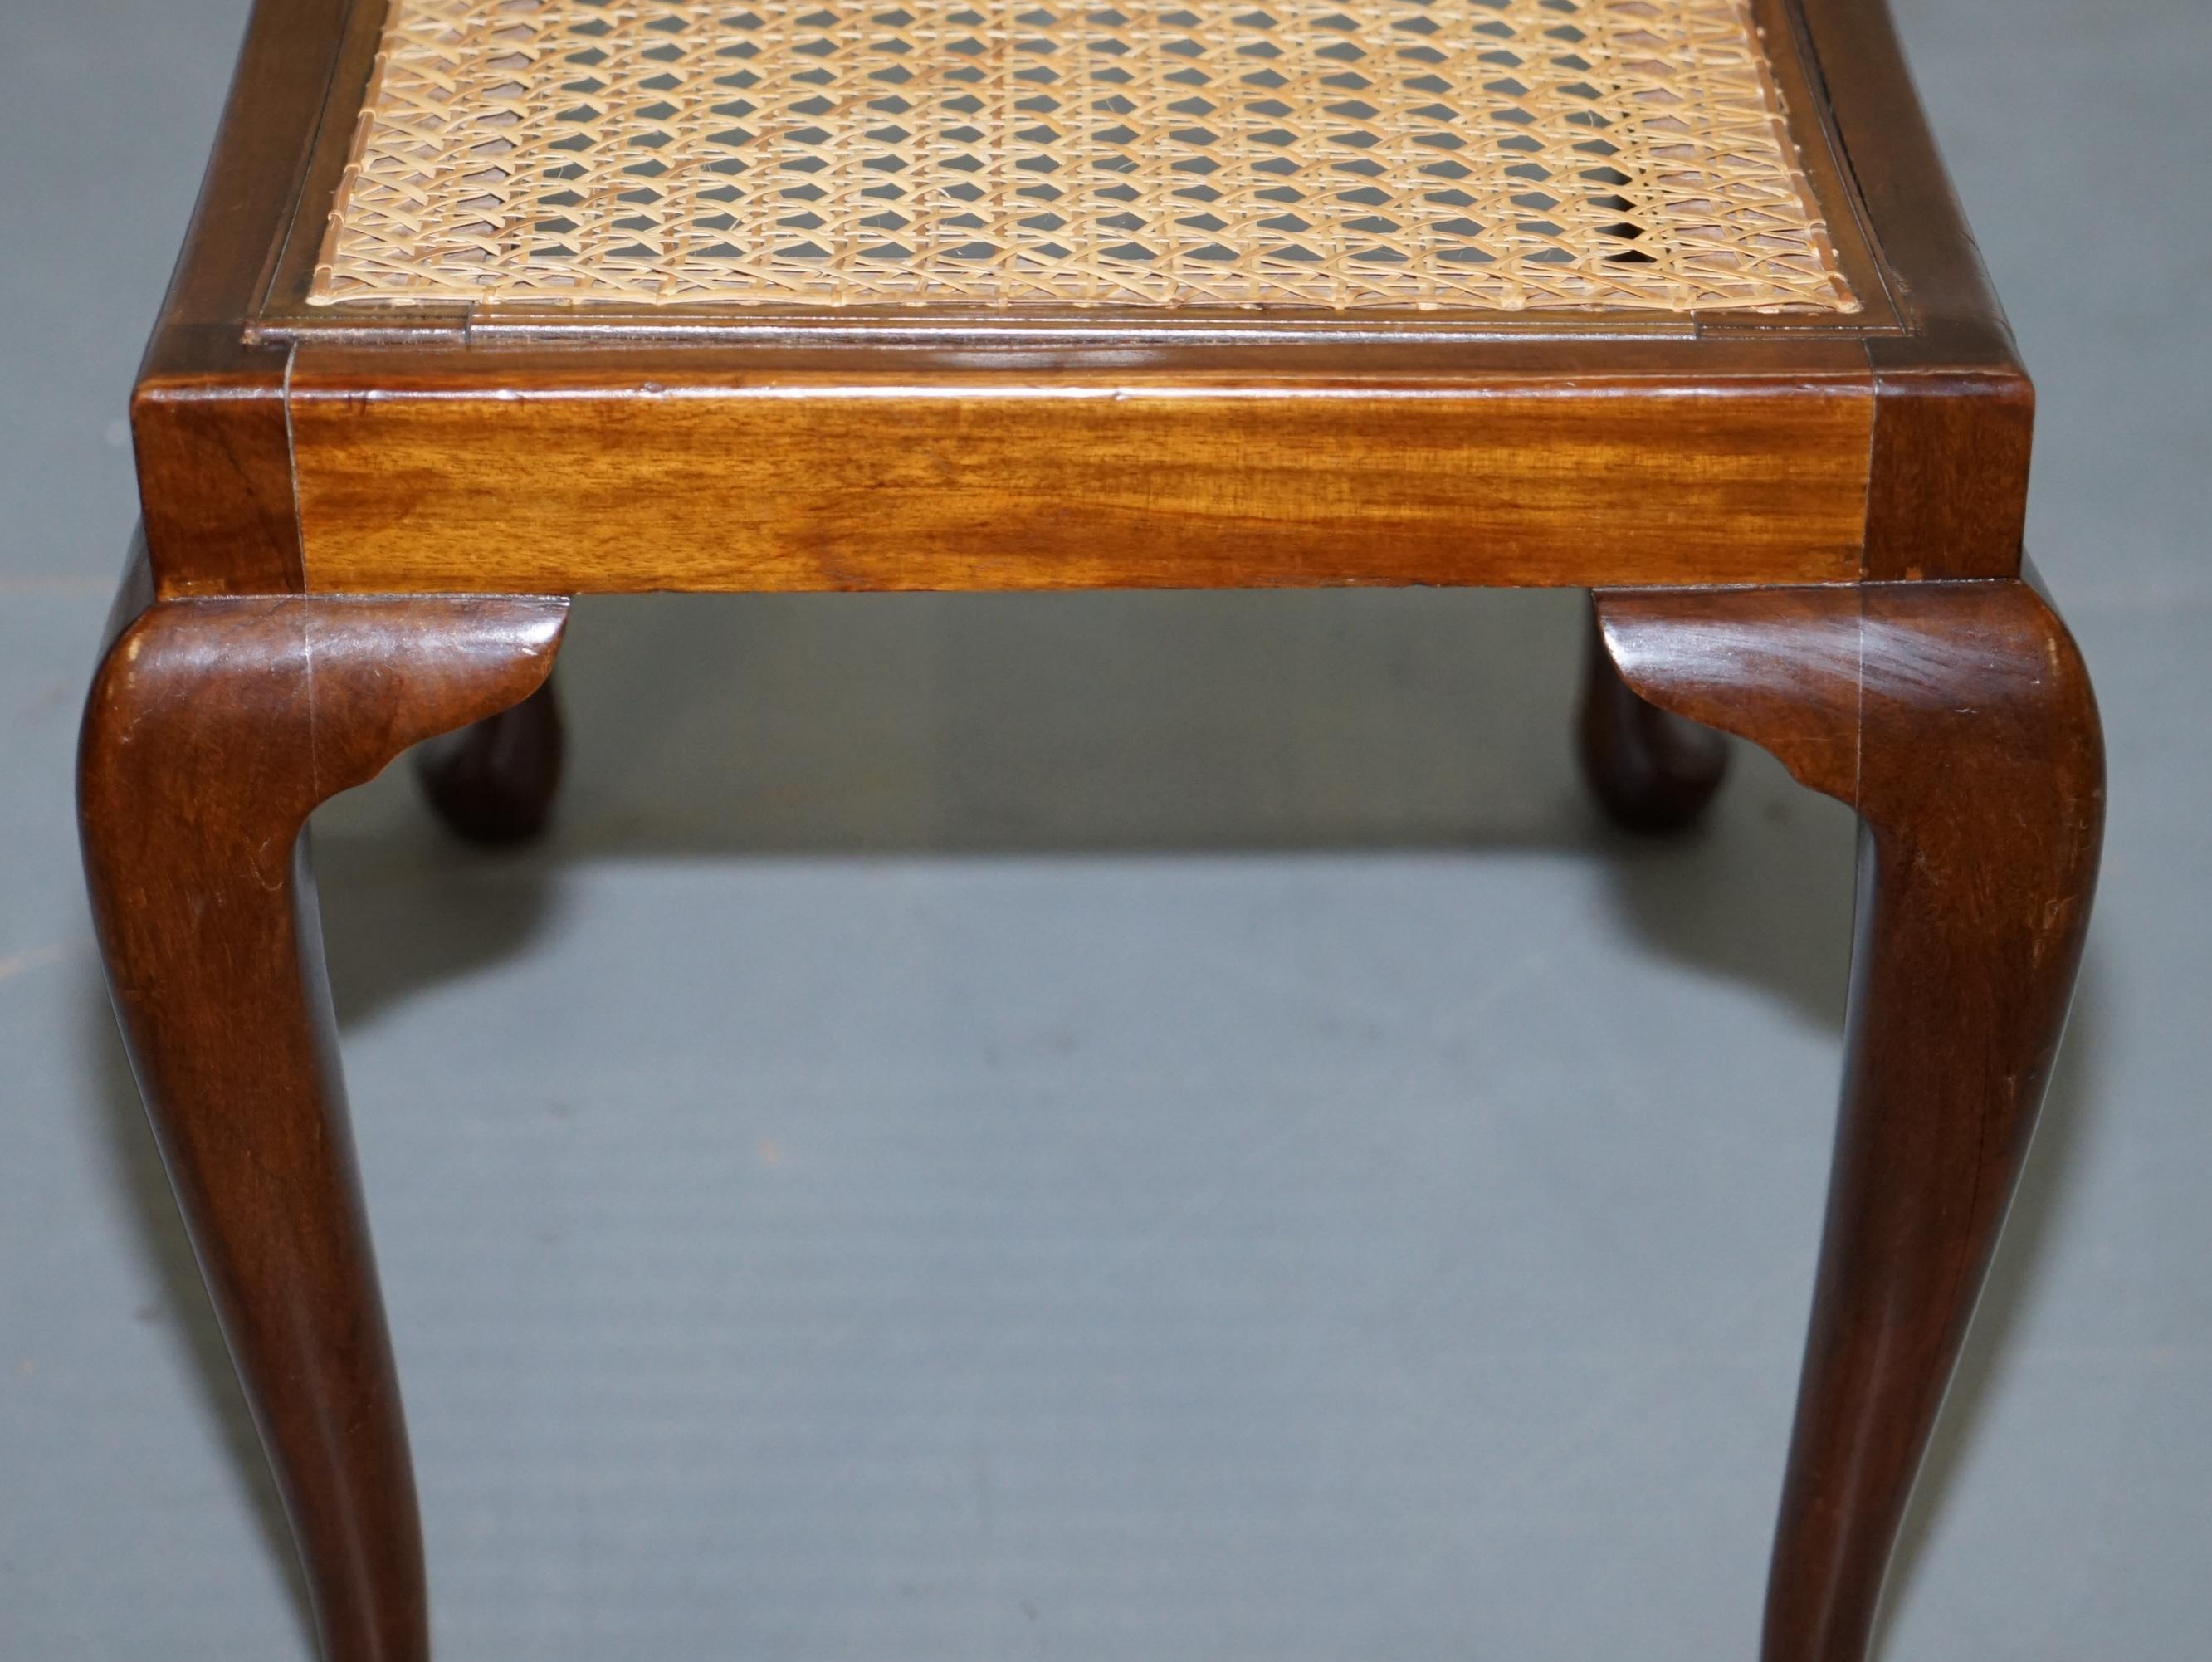 Hand-Crafted Lovely Vintage circa 1940s Rattan Berger Bench Stool Seat with Cabriolet Legs